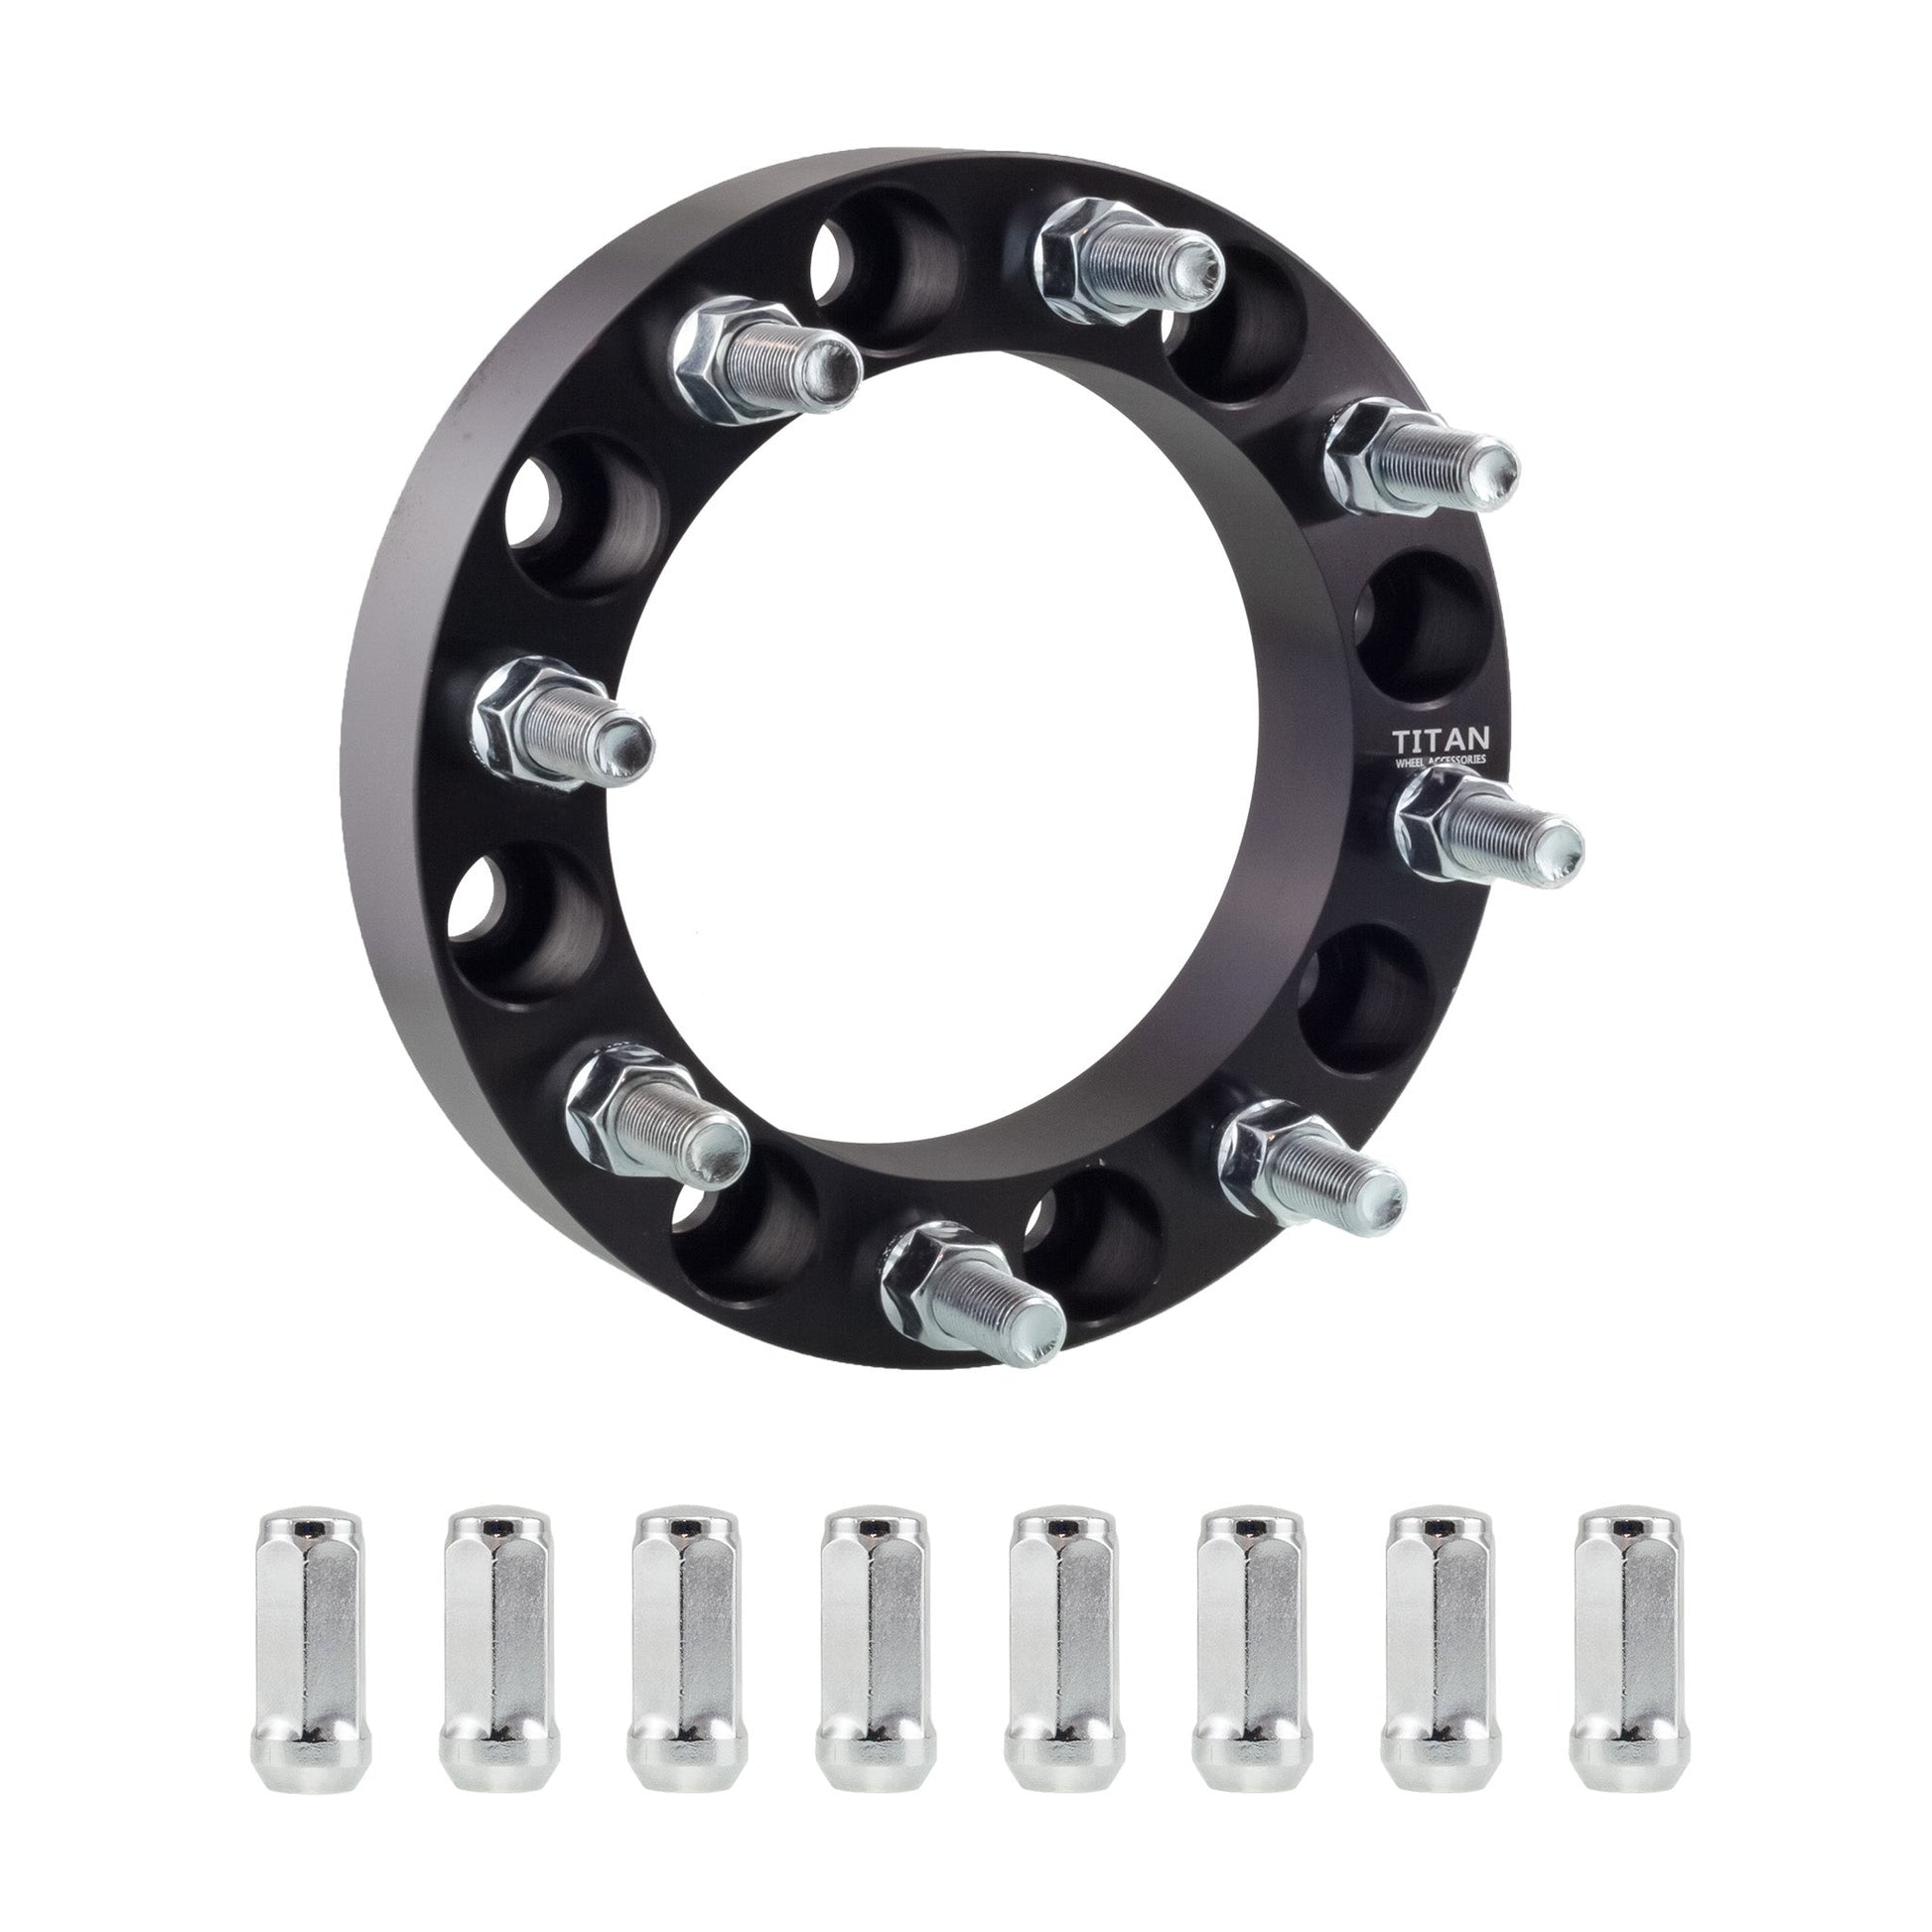 1.5" (38mm) Titan Wheel Spacers for Ford F250 F350 Excursion | 8x170 | 124.9 Hubcentric |14x1.5 Studs | Titan Wheel Accessories